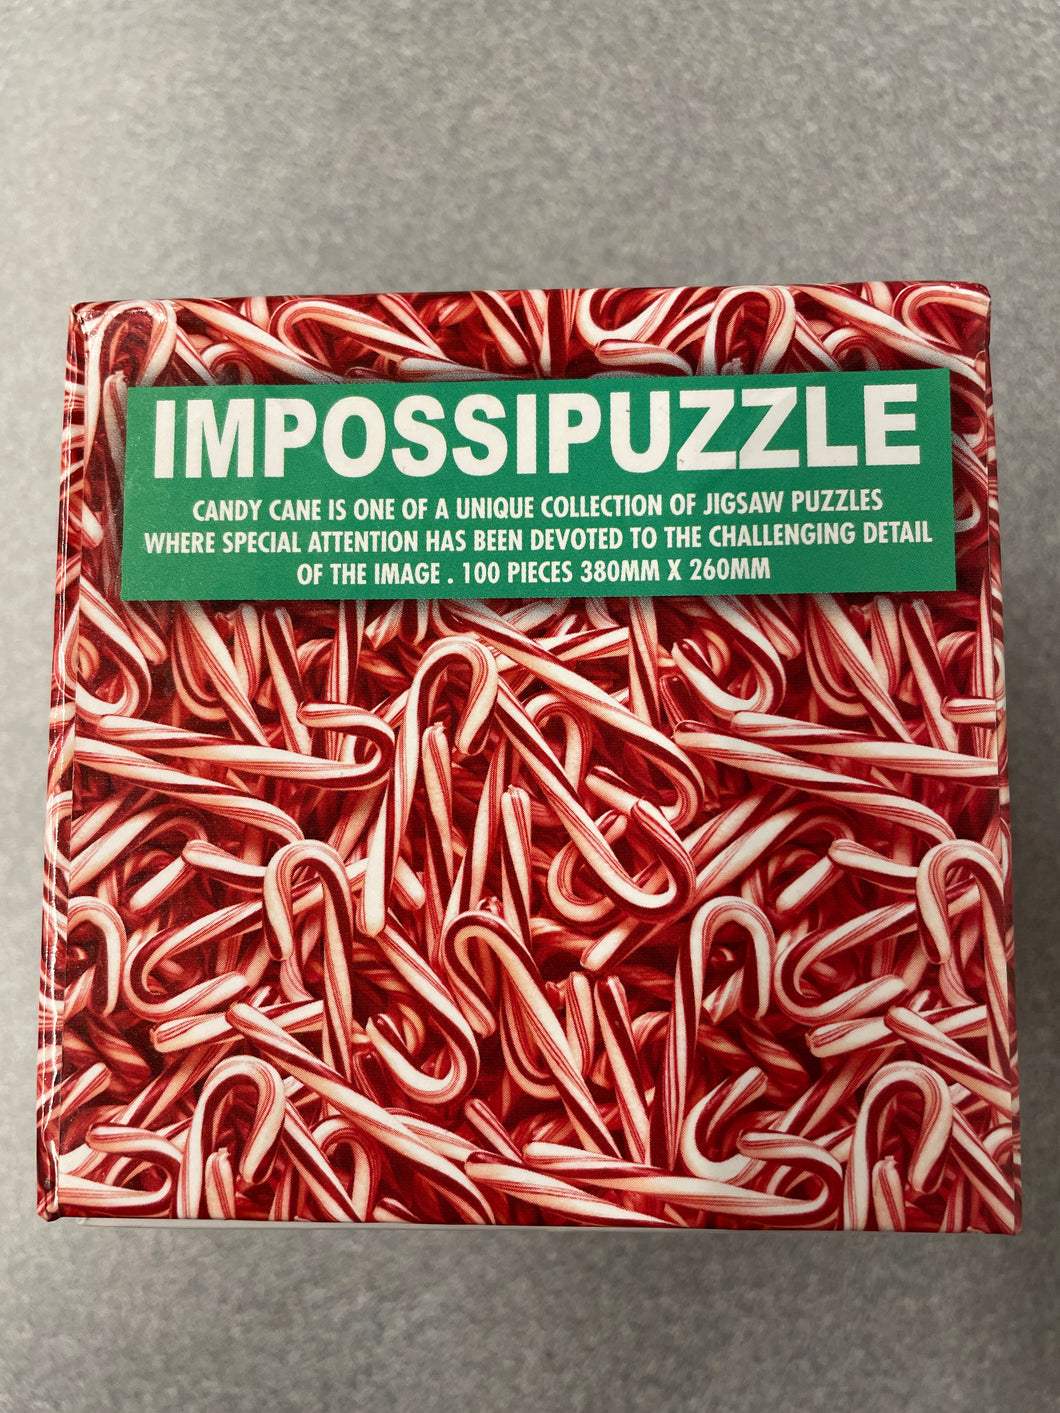 PUZZLE: Impossipuzzle: Candy Cane CG 2/24